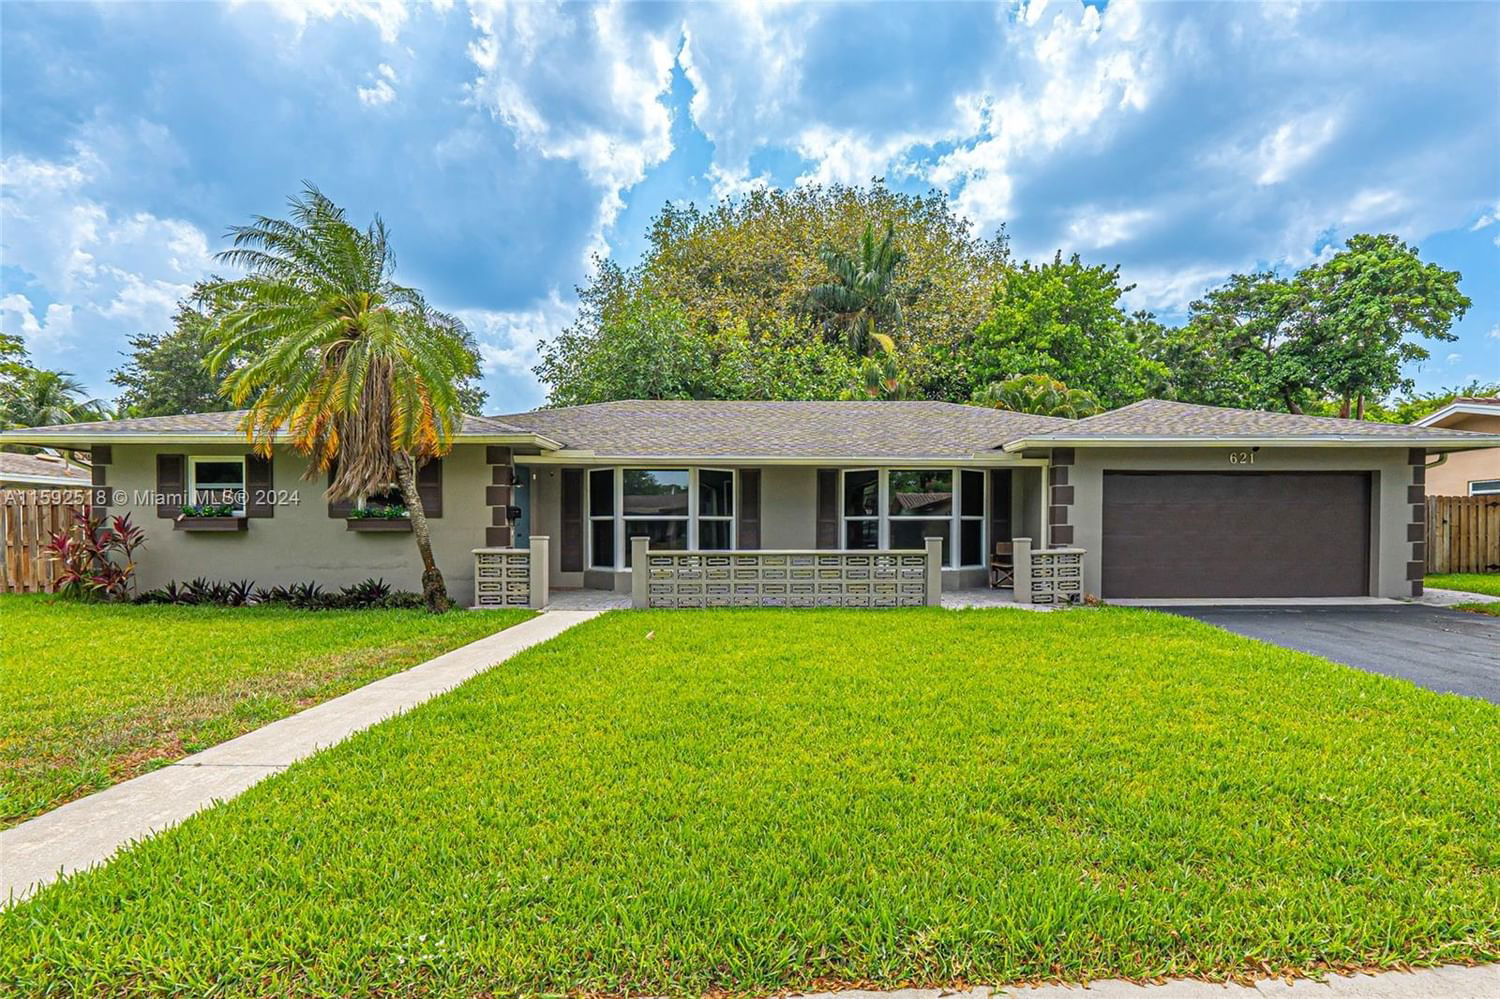 Real estate property located at 621 71st Ave, Broward County, PLANTATIONS SECLUDED GARD, Plantation, FL